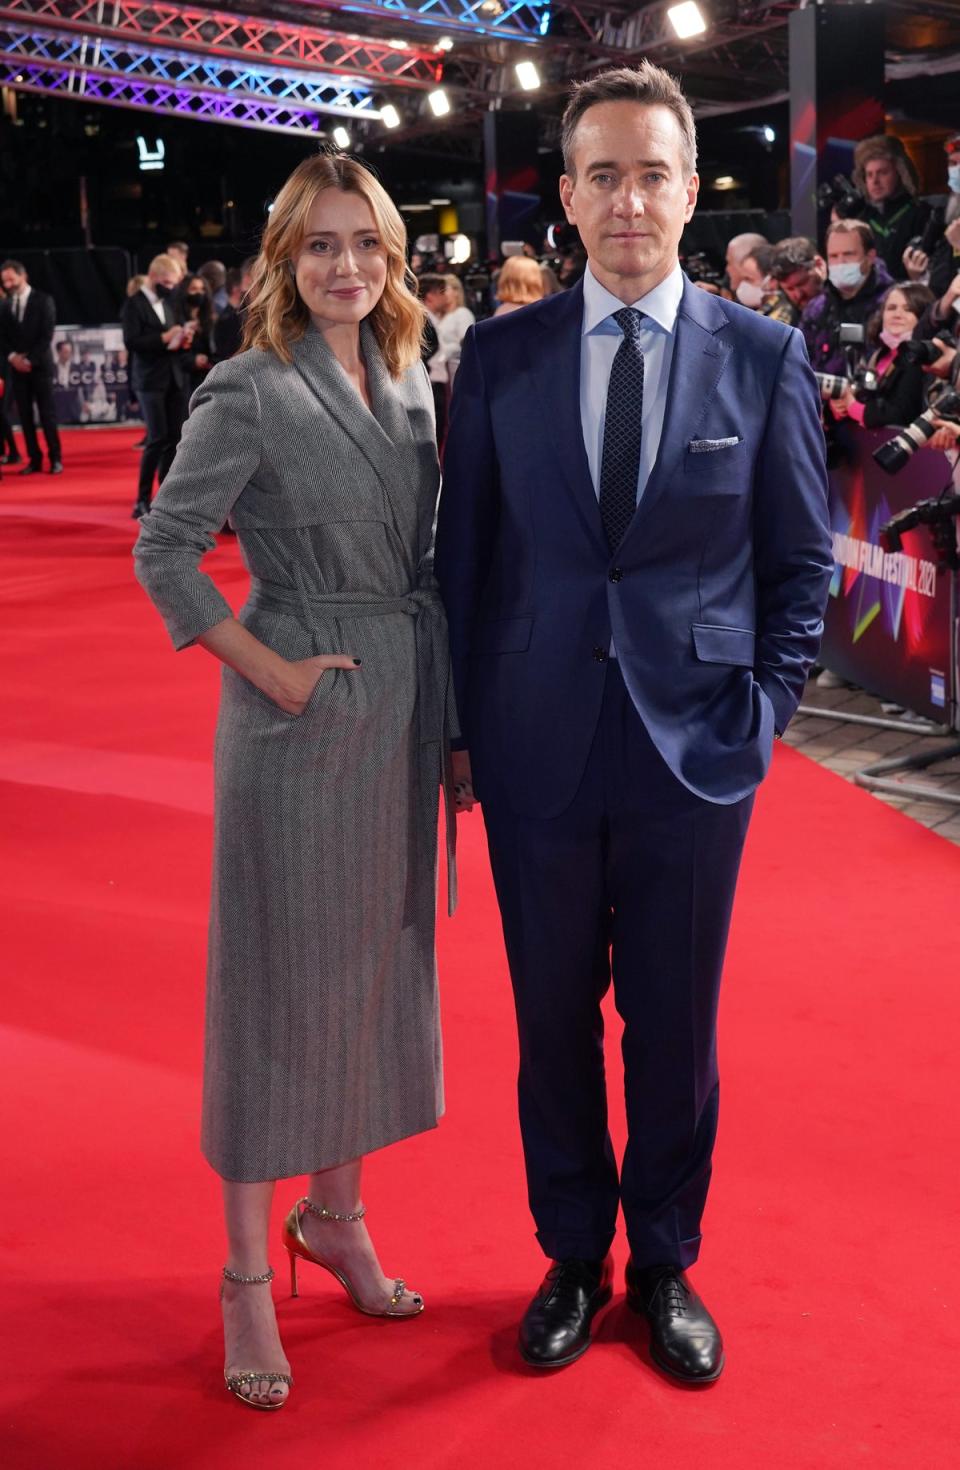 Keeley Hawes and Matthew Macfadyen at the world premiere of Succession in London in 2021 (Ian West/PA) (PA Archive)